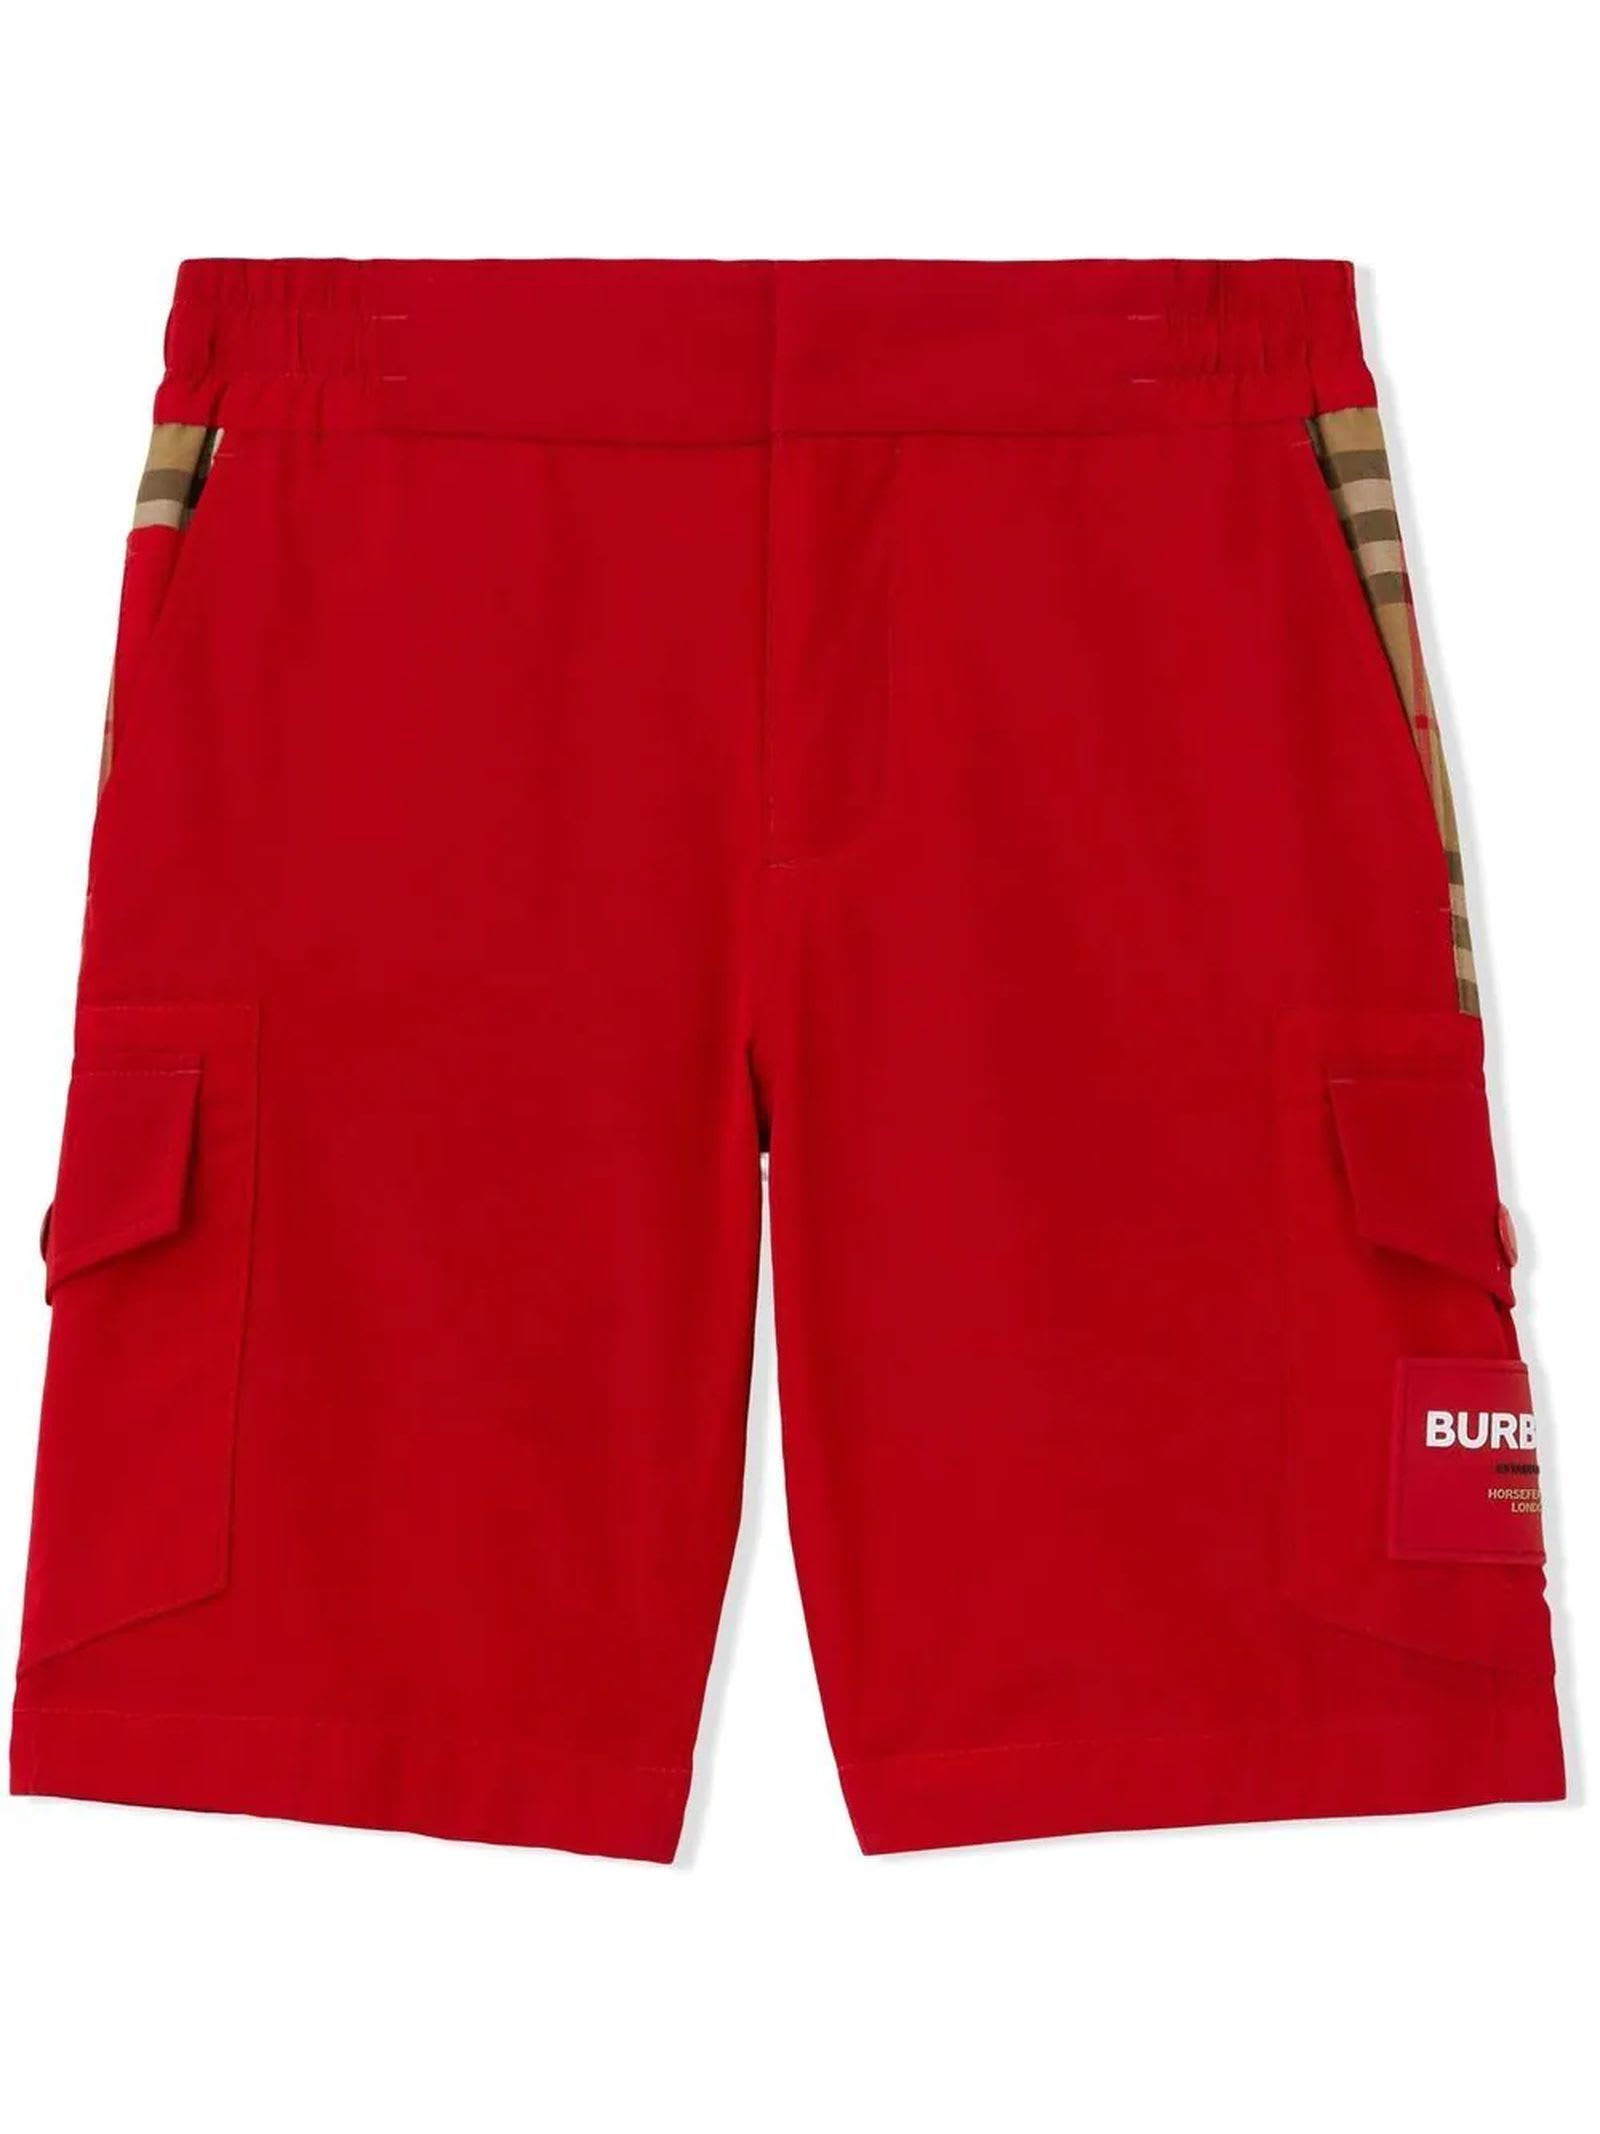 Burberry Kids Shorts Red